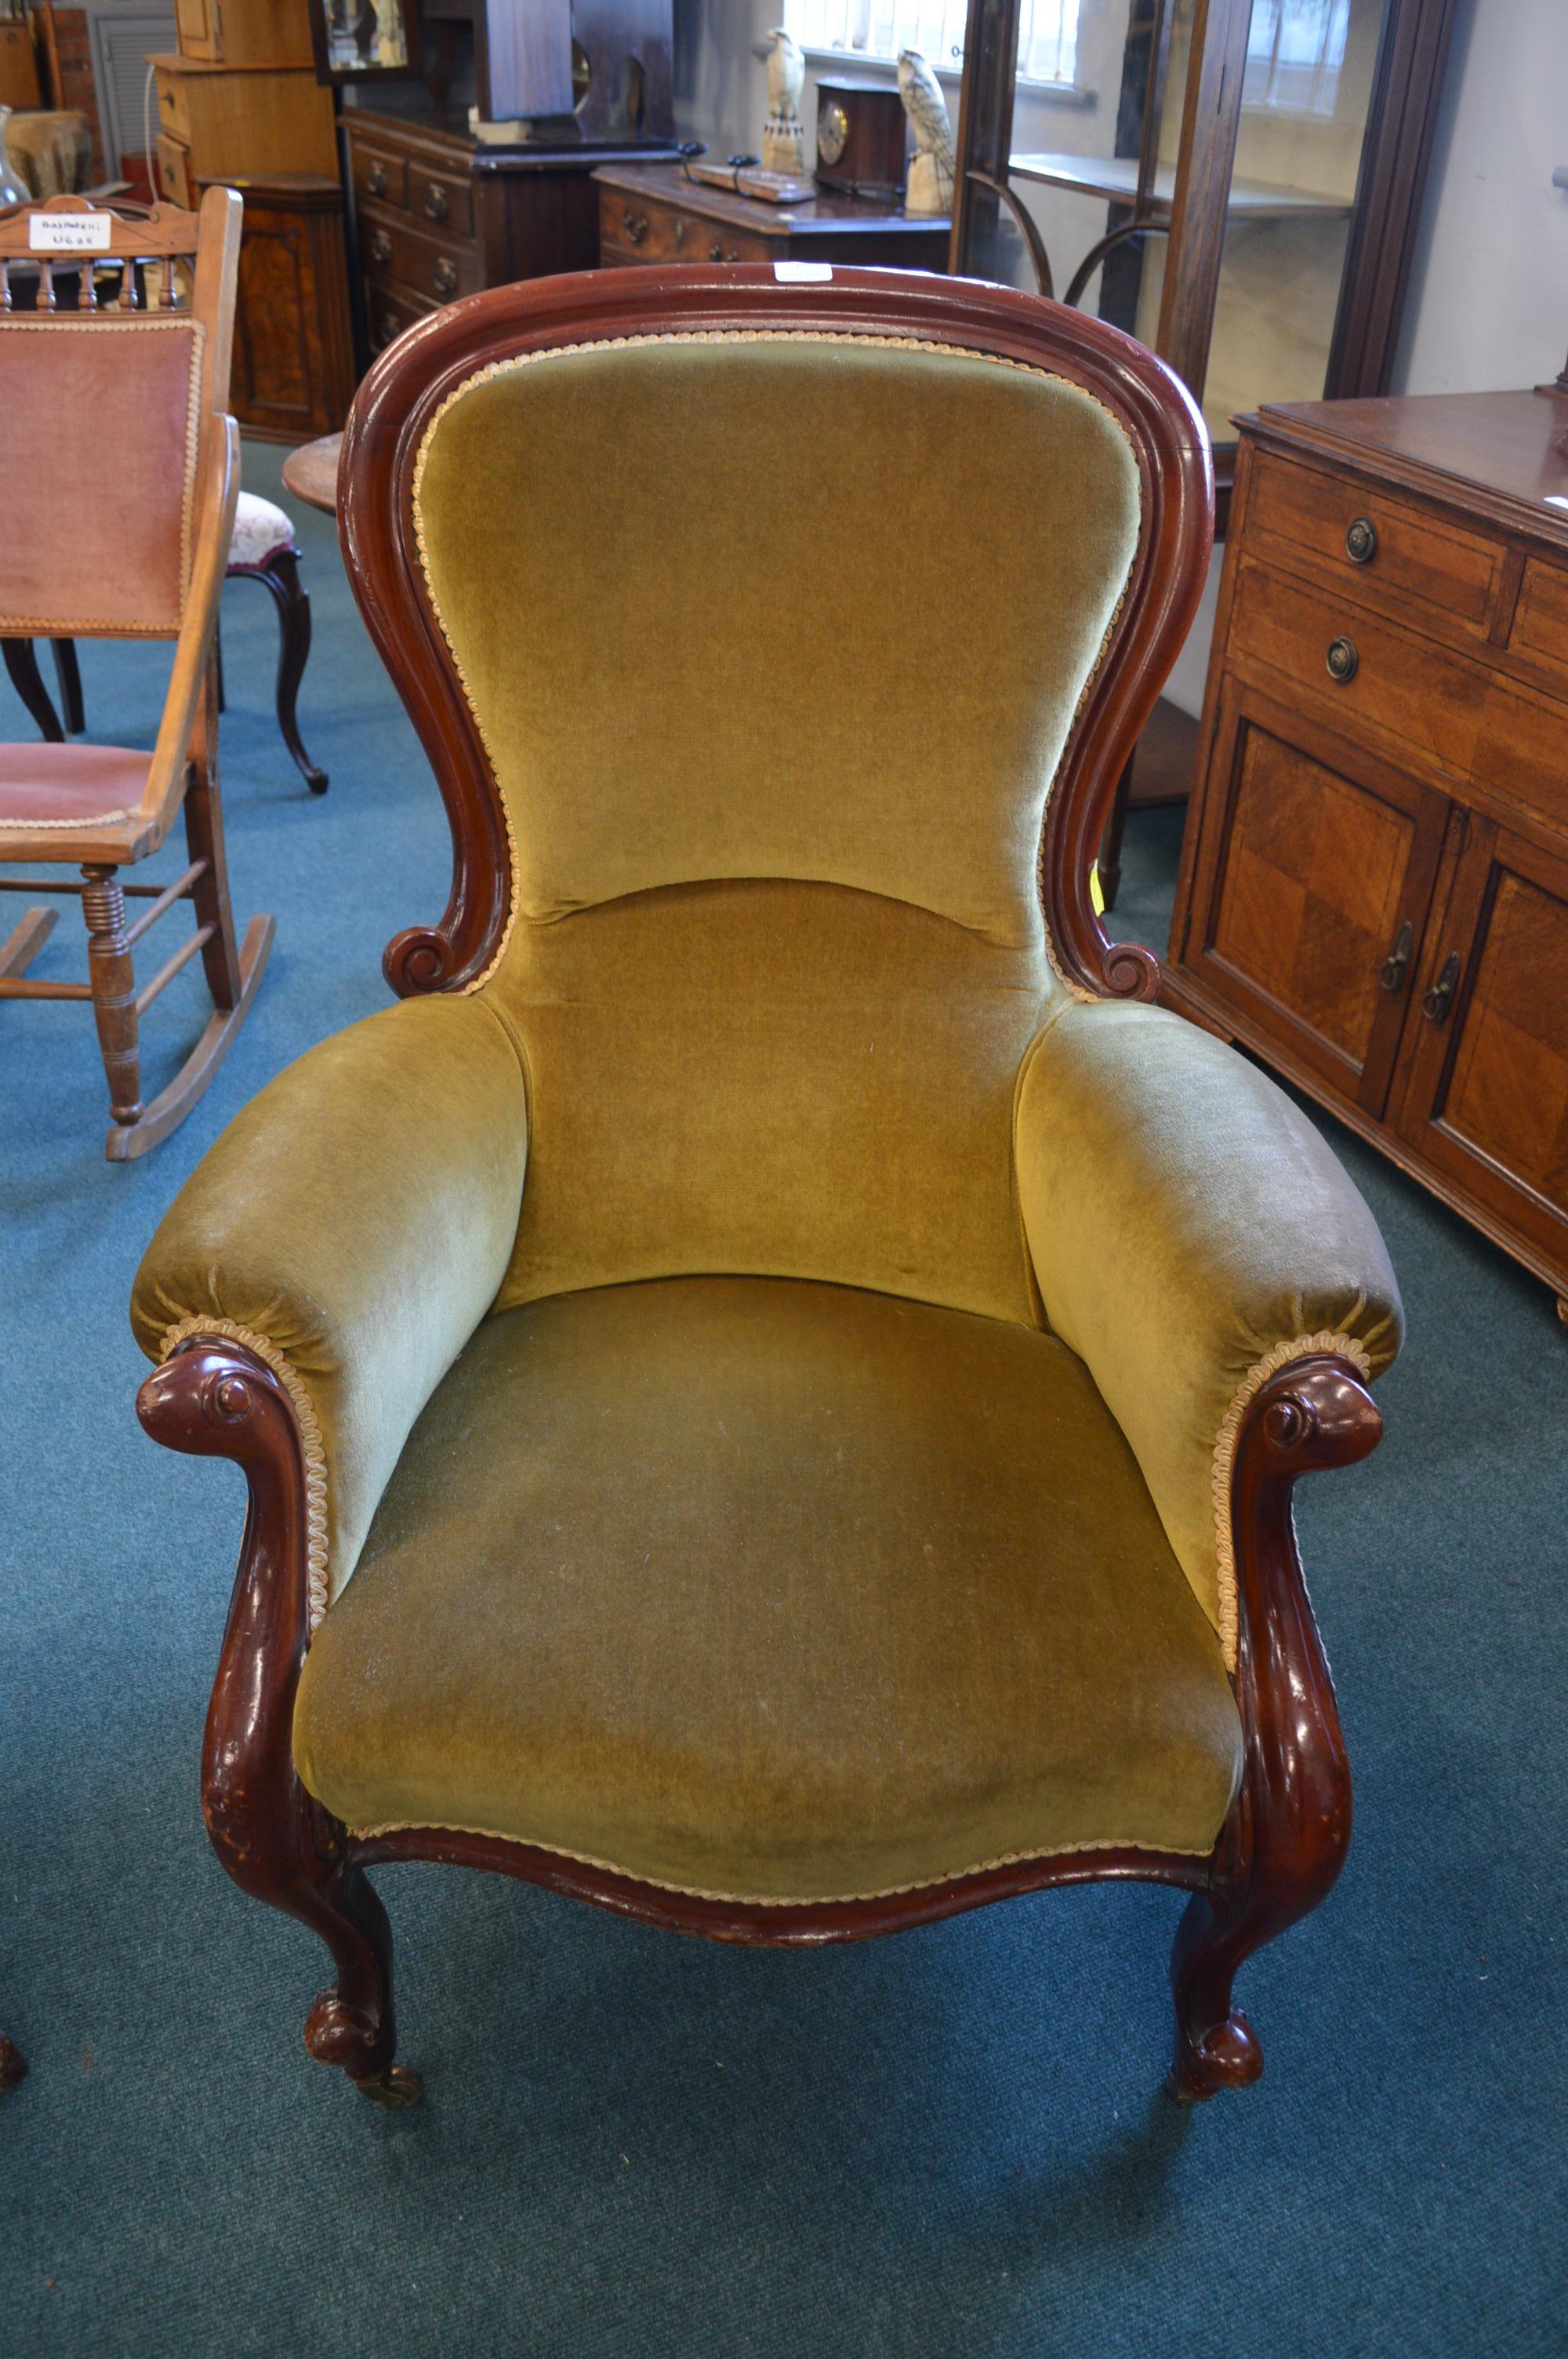 Victorian Nursing Chair with Mustard Upholstery